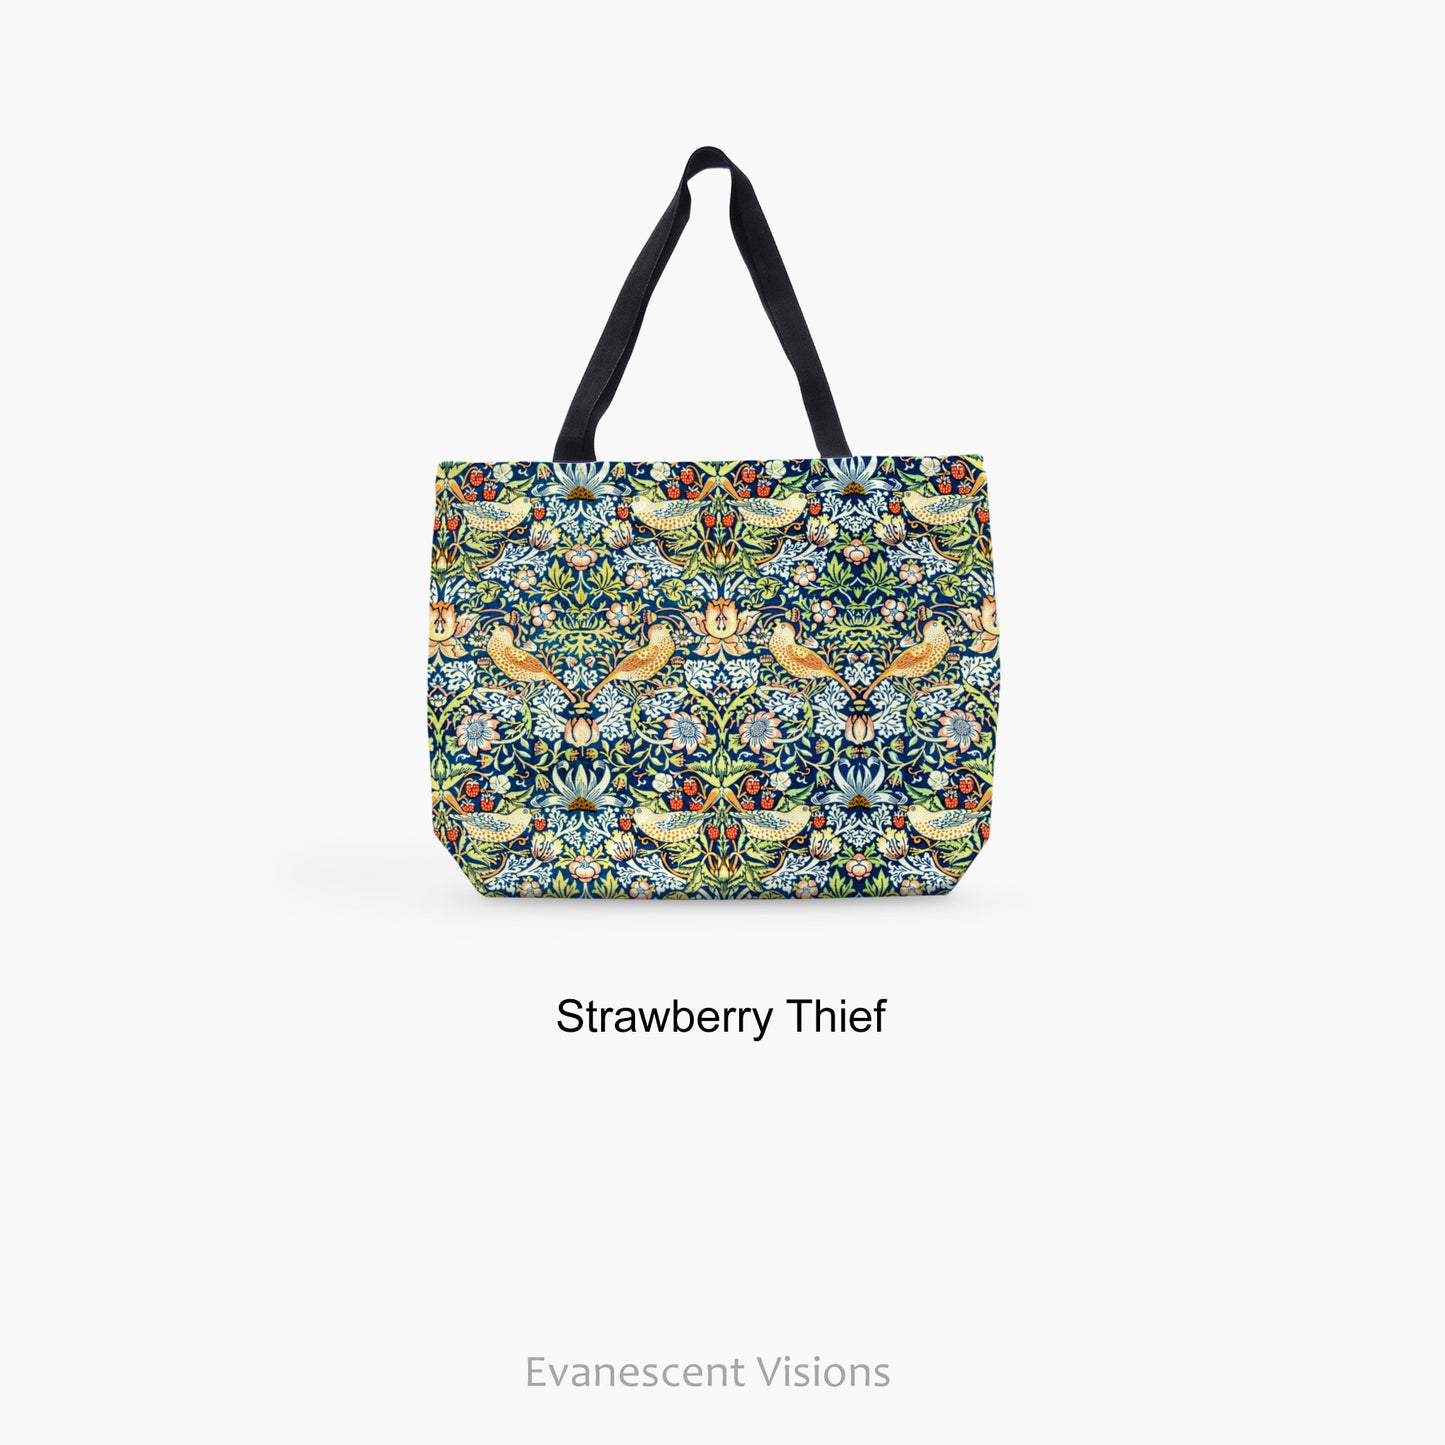 William Morris Patterned Large Tote Bag with the Strawberry Thief design option